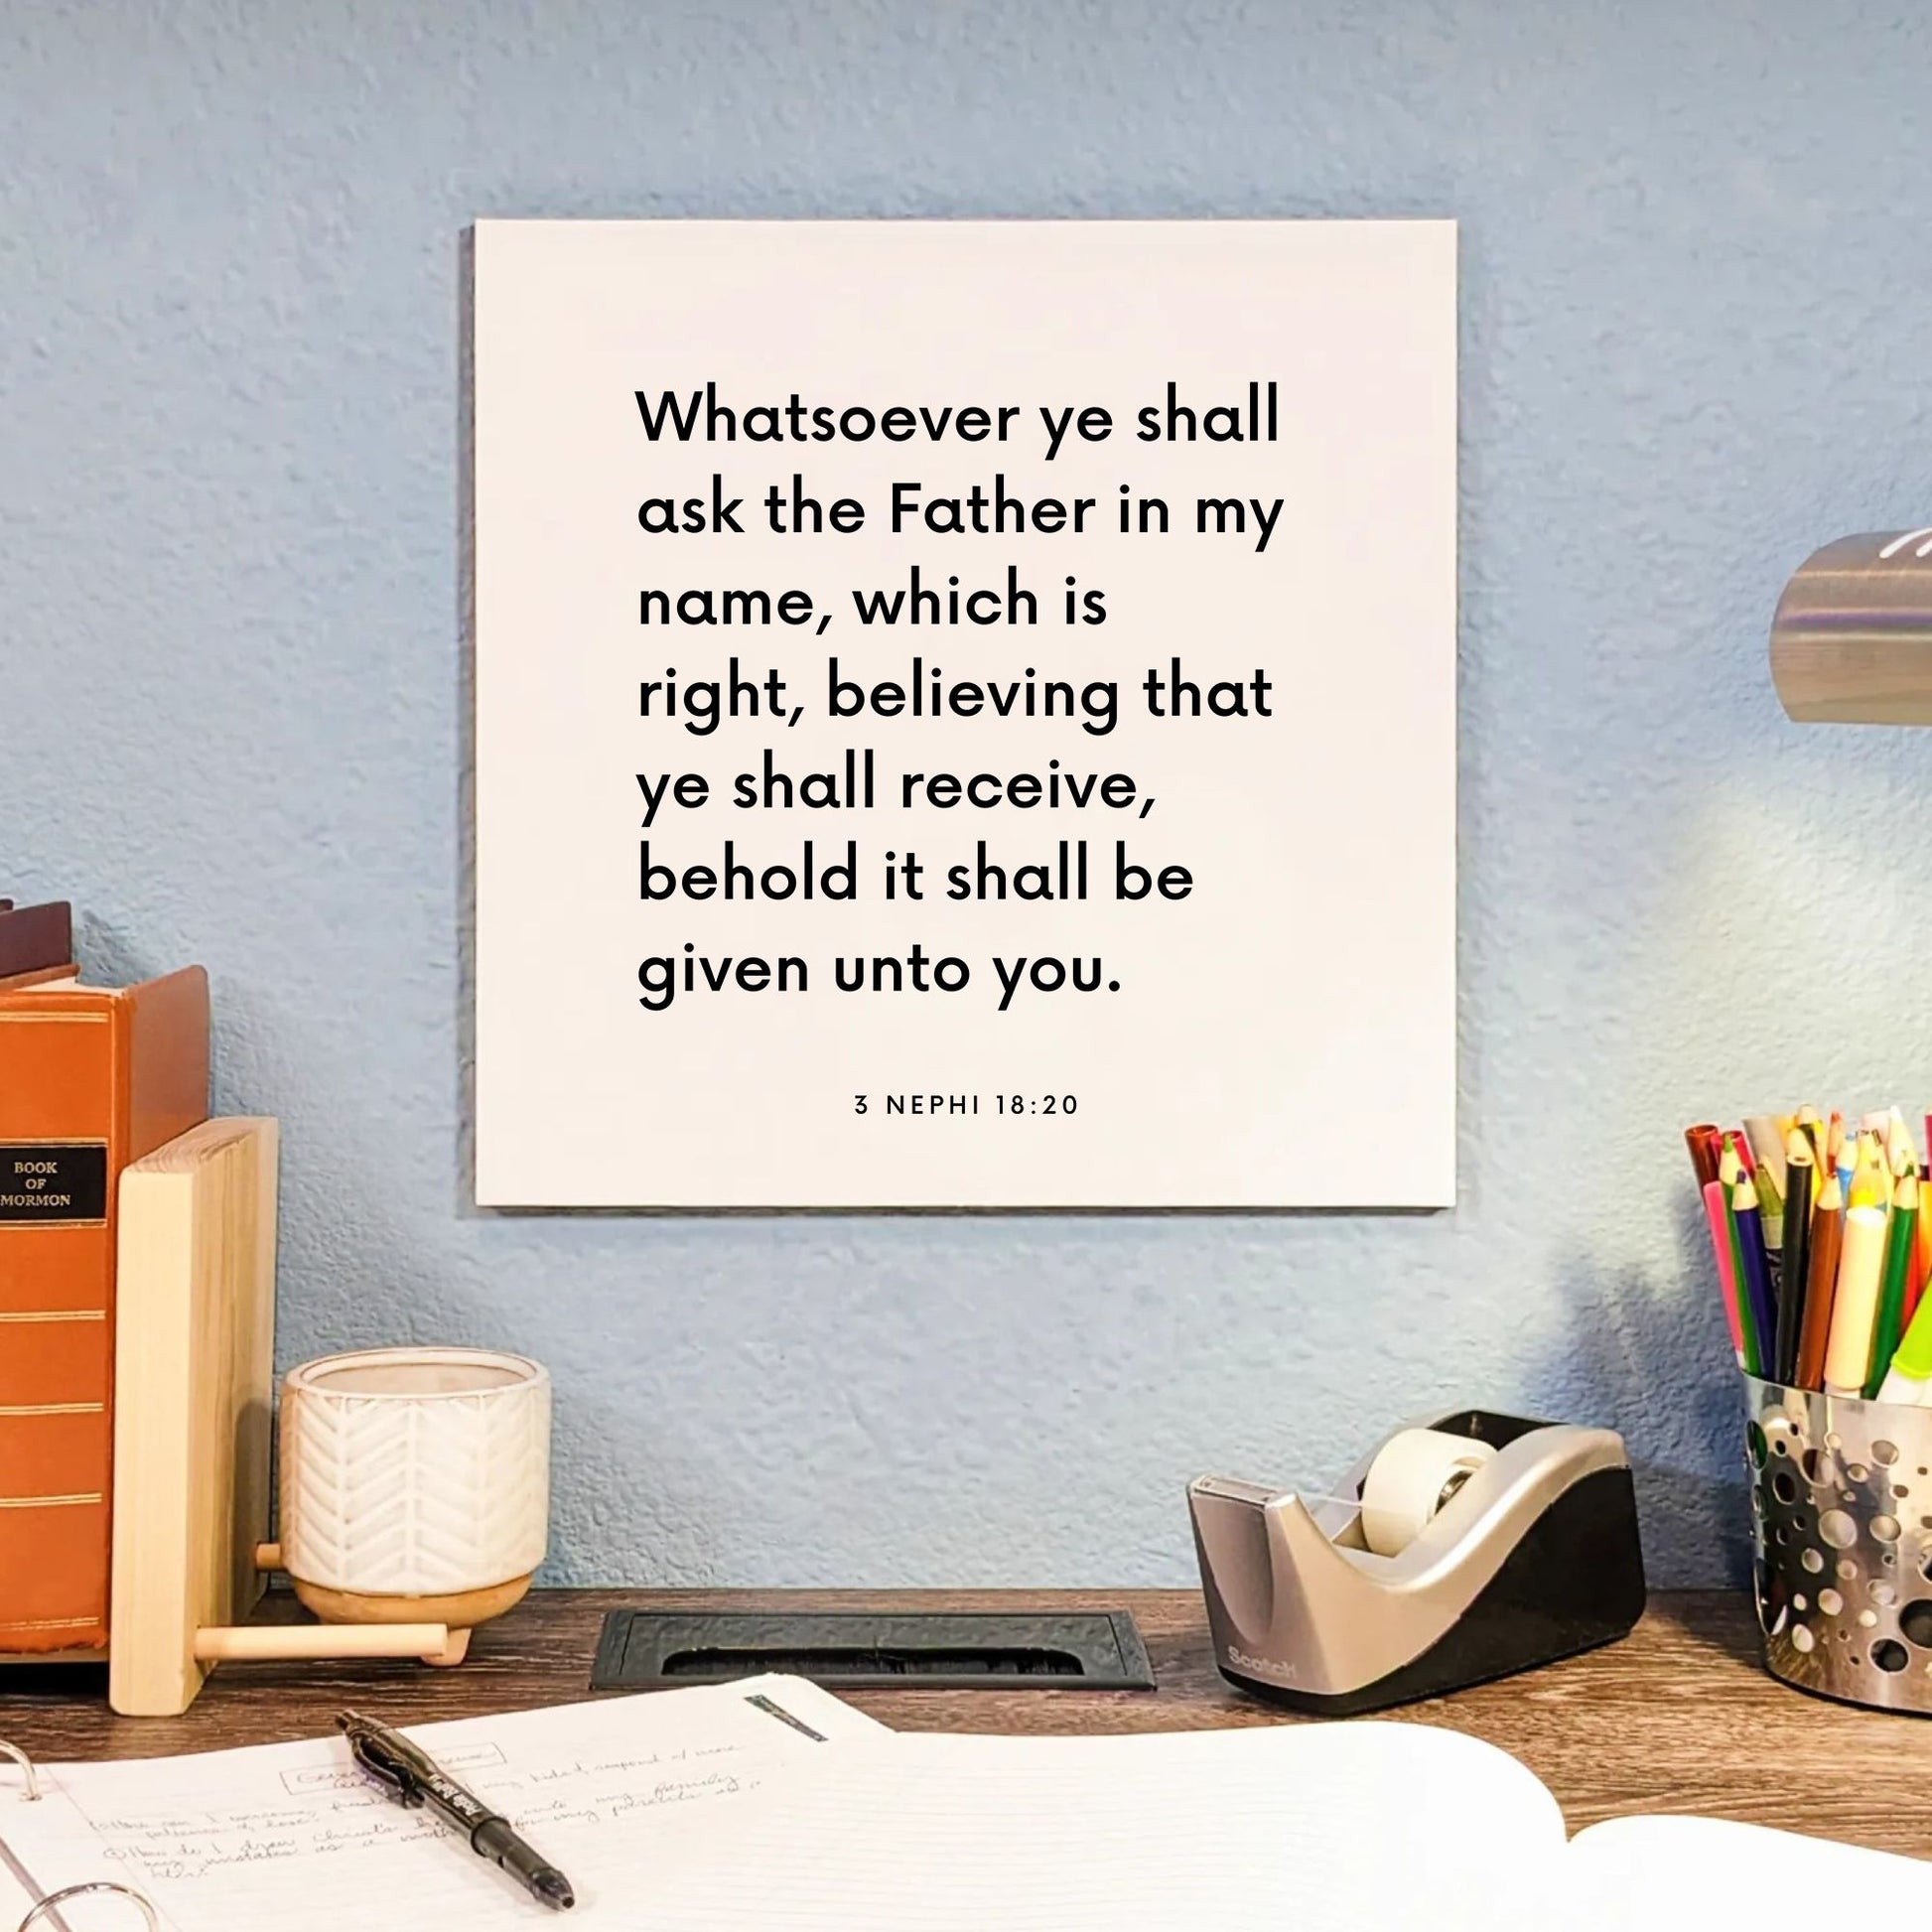 Desk mouting of the scripture tile for 3 Nephi 18:20 - "Whatsoever ye shall ask the Father in my name"